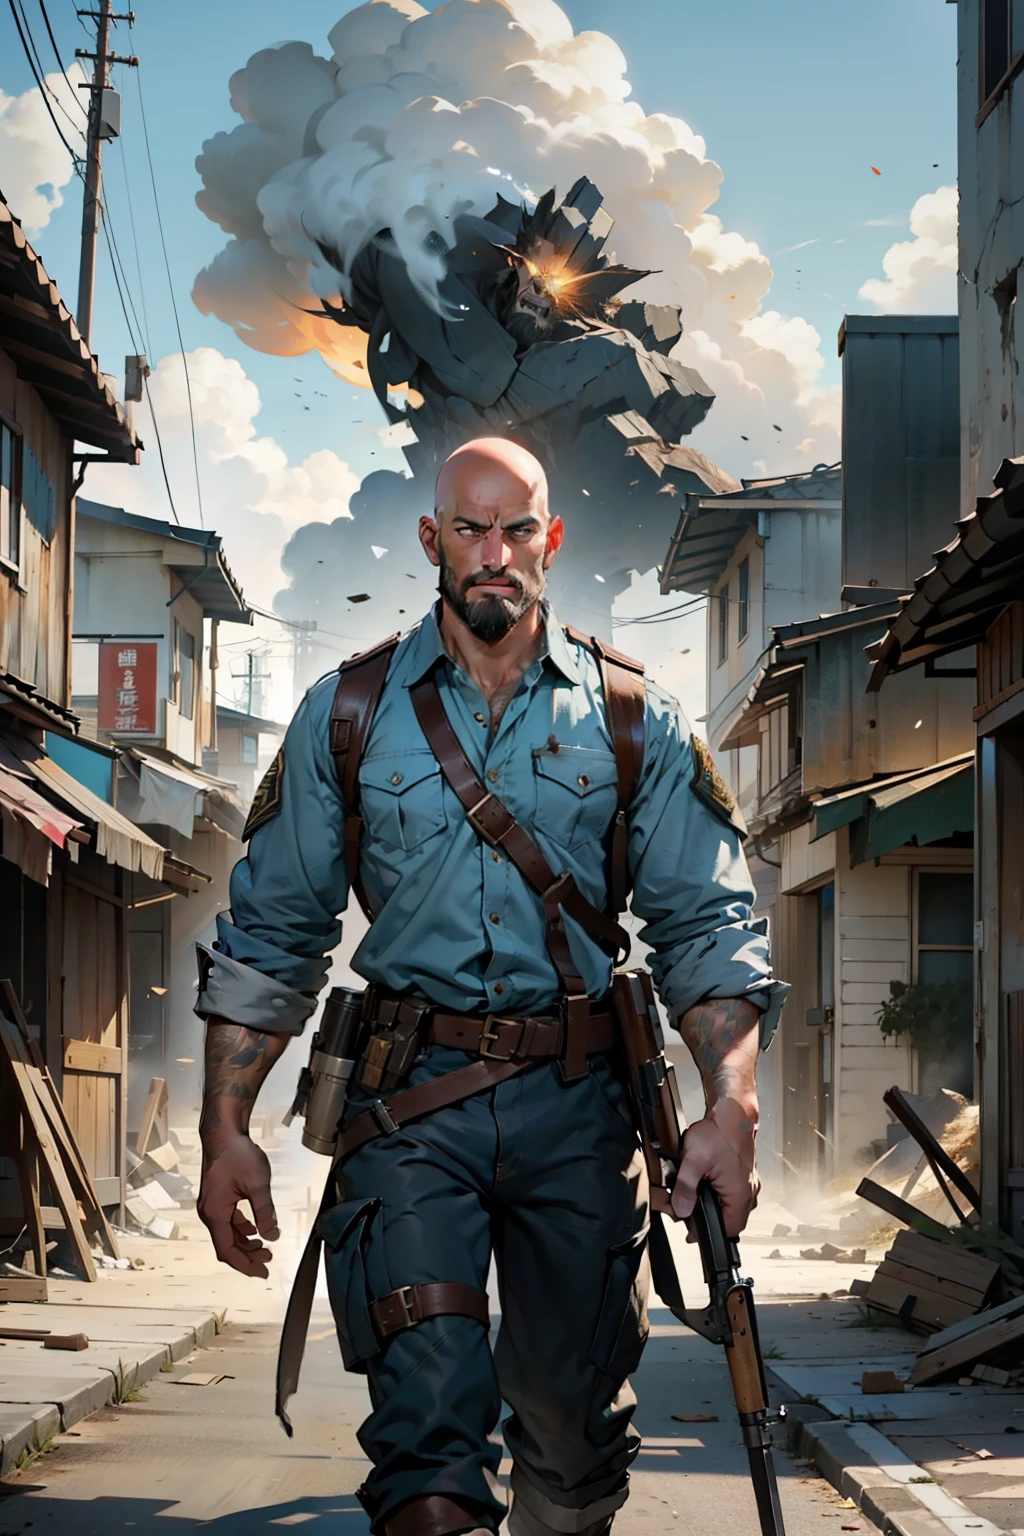 A middle-aged male hired gun, bald with a short, meticulously designed beard, stands tall against the backdrop of a chaotic battlefield.His eyes, ultra-detailed and hyperrealistic, convey a fierce intensity and focus. His body, detailed and defined, is outfitted in a military uniform, the fabric worn and weathered from the rigors of combat. In one hand, he clutches a weathered gun, the barrel gleaming in the sunlight. Behind him, the landscape is a blur of explosion and destruction, the ground shaking beneath his feet from the impact of nearby blasts. Despite the chaos around him, his expression remains calm and determined, the lines on his face deepening with each